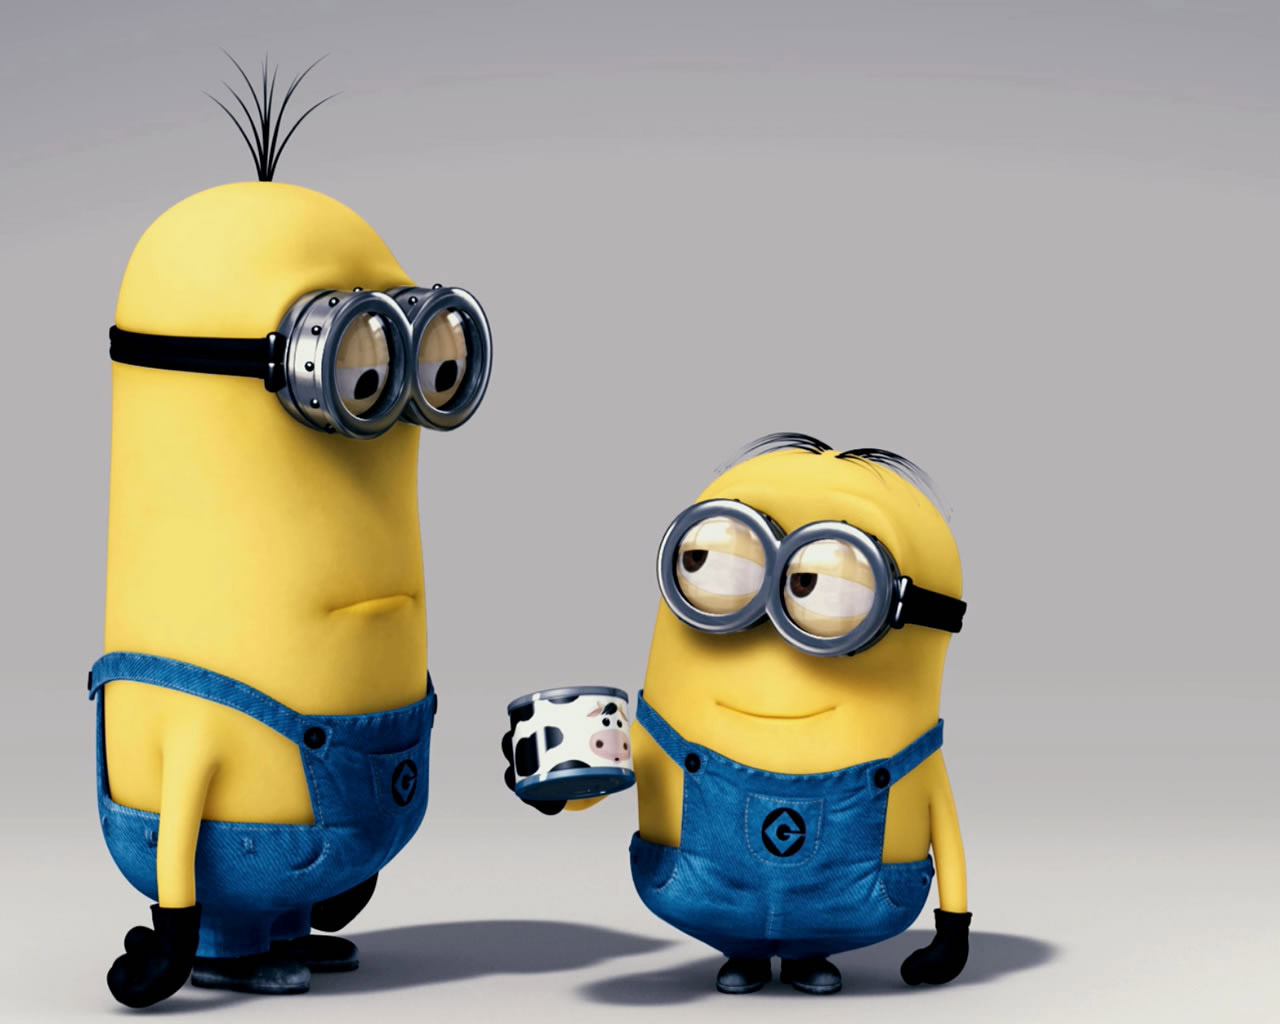 Despicable Me Minions Wallpaper Image Amp Pictures Becuo